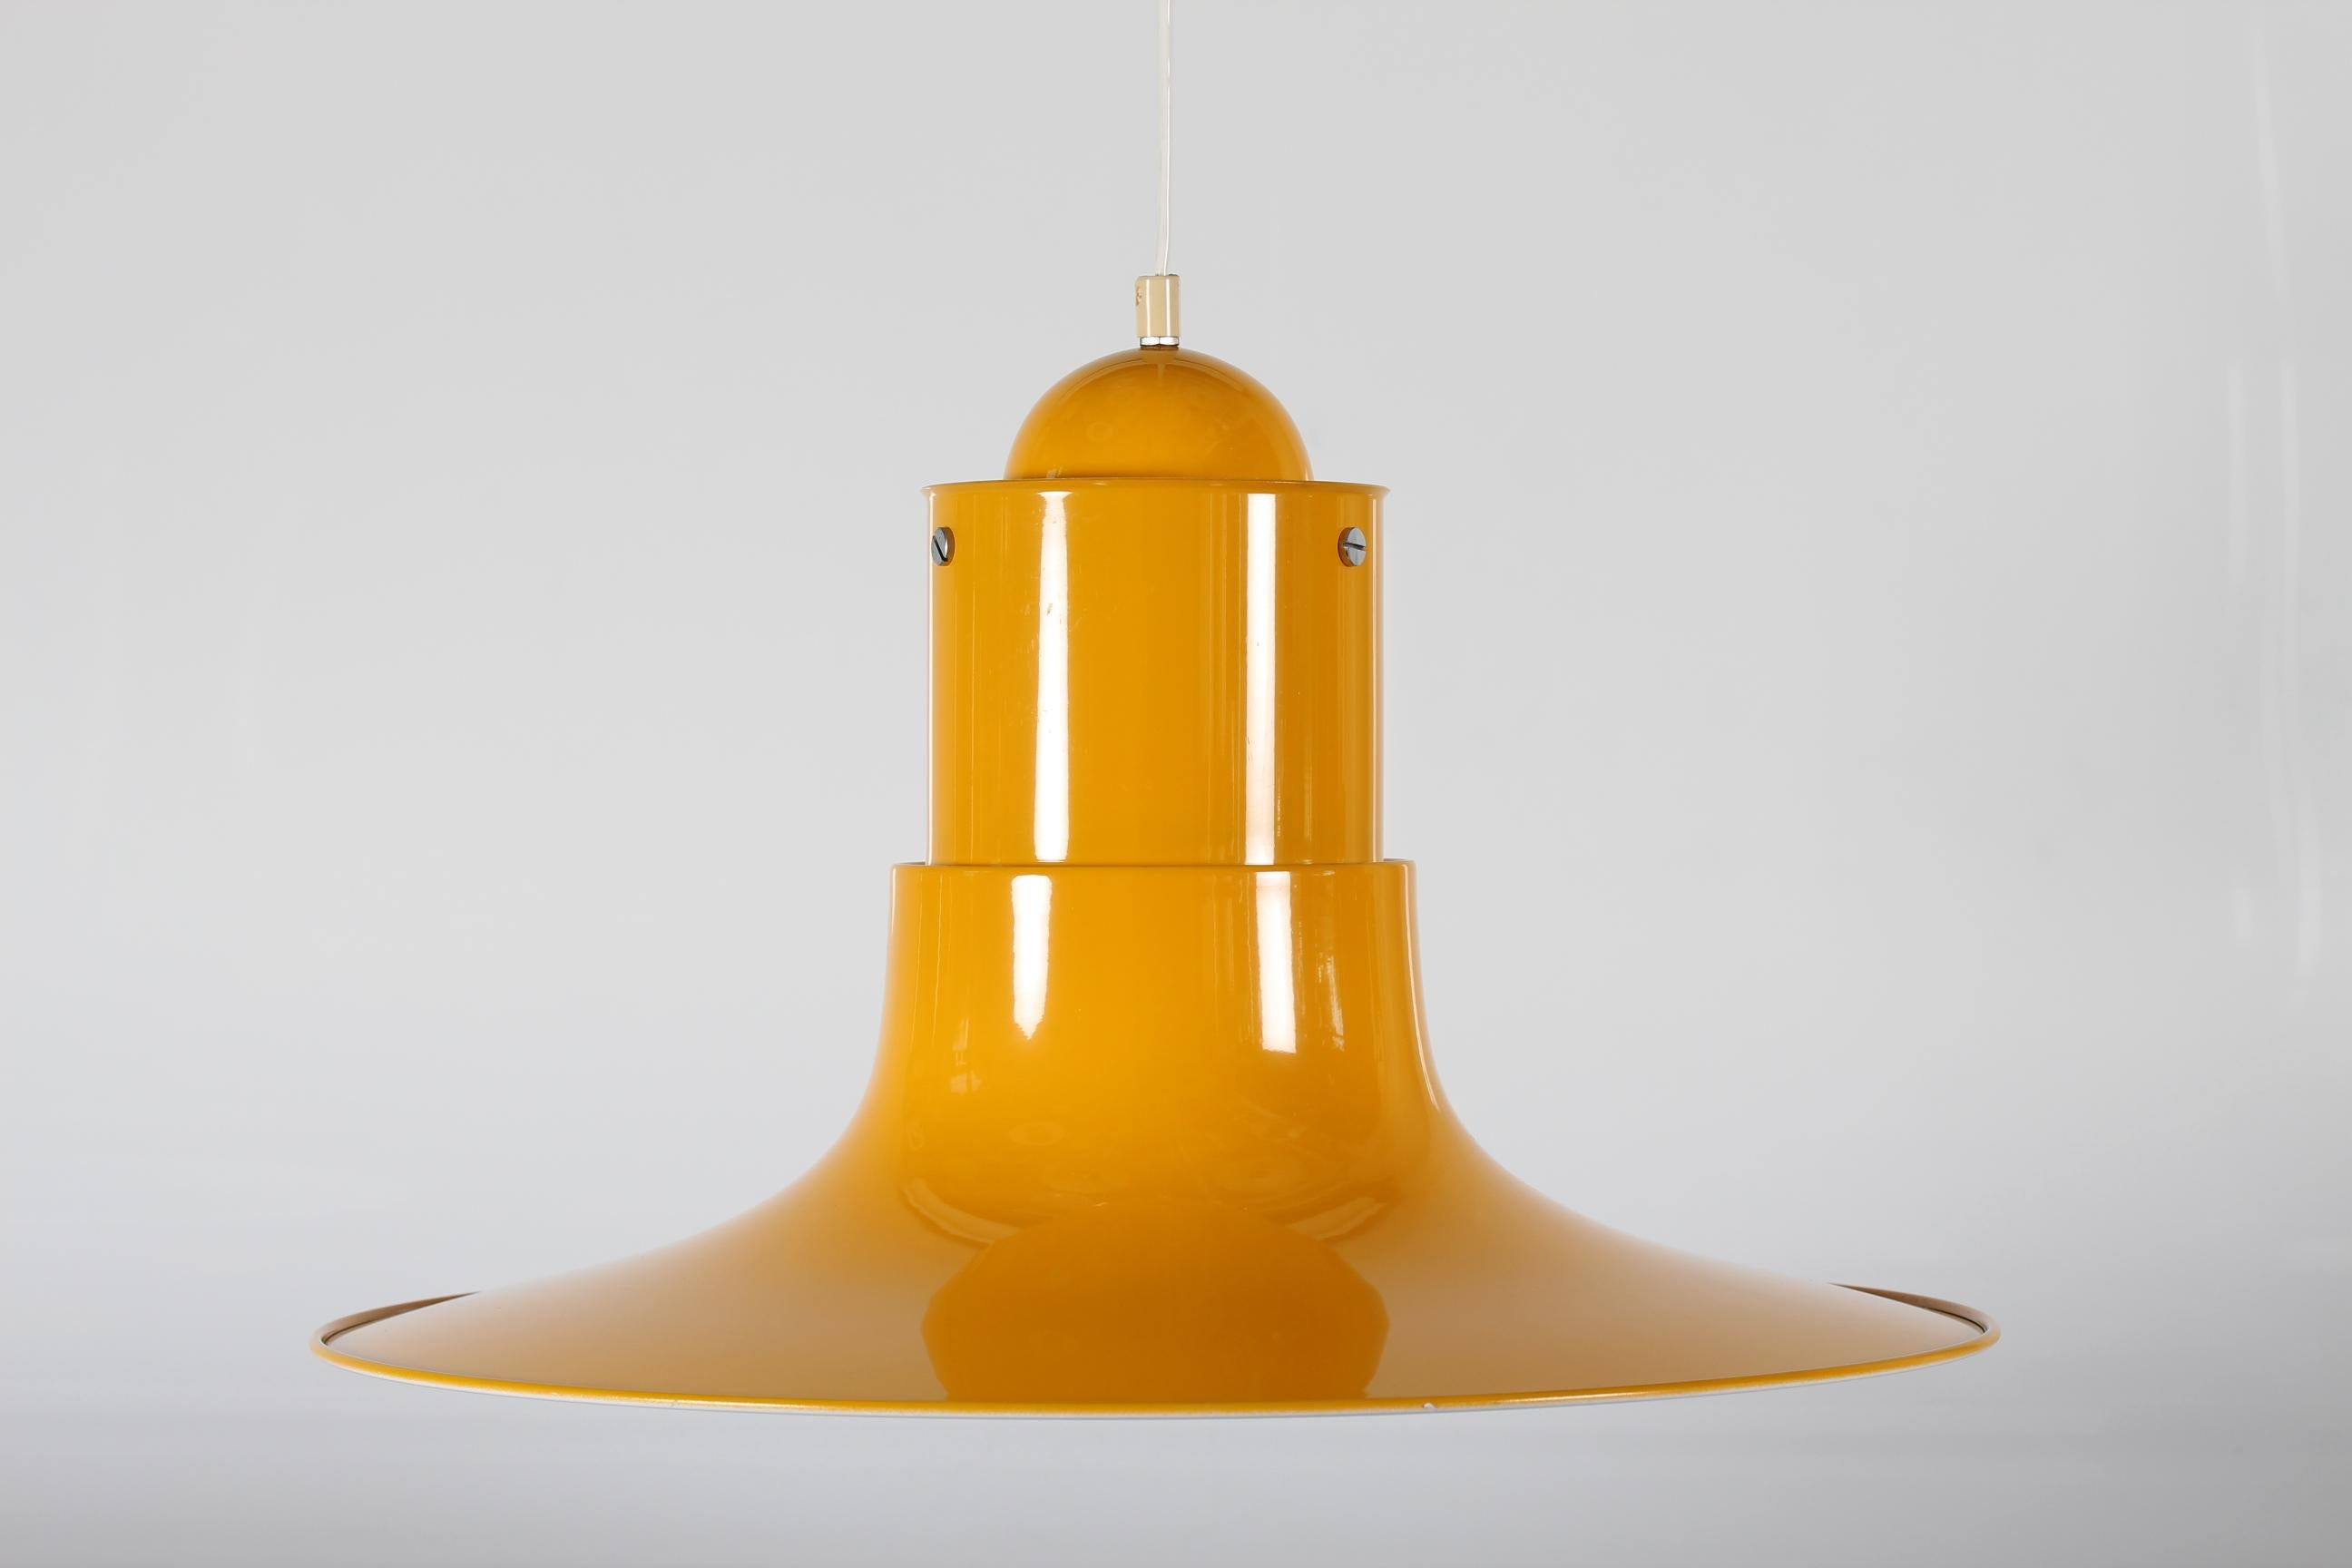 Large Swedish Pendant Light Cyklon by P. O. Ström with Yellow Lacquer, 1970s For Sale 4